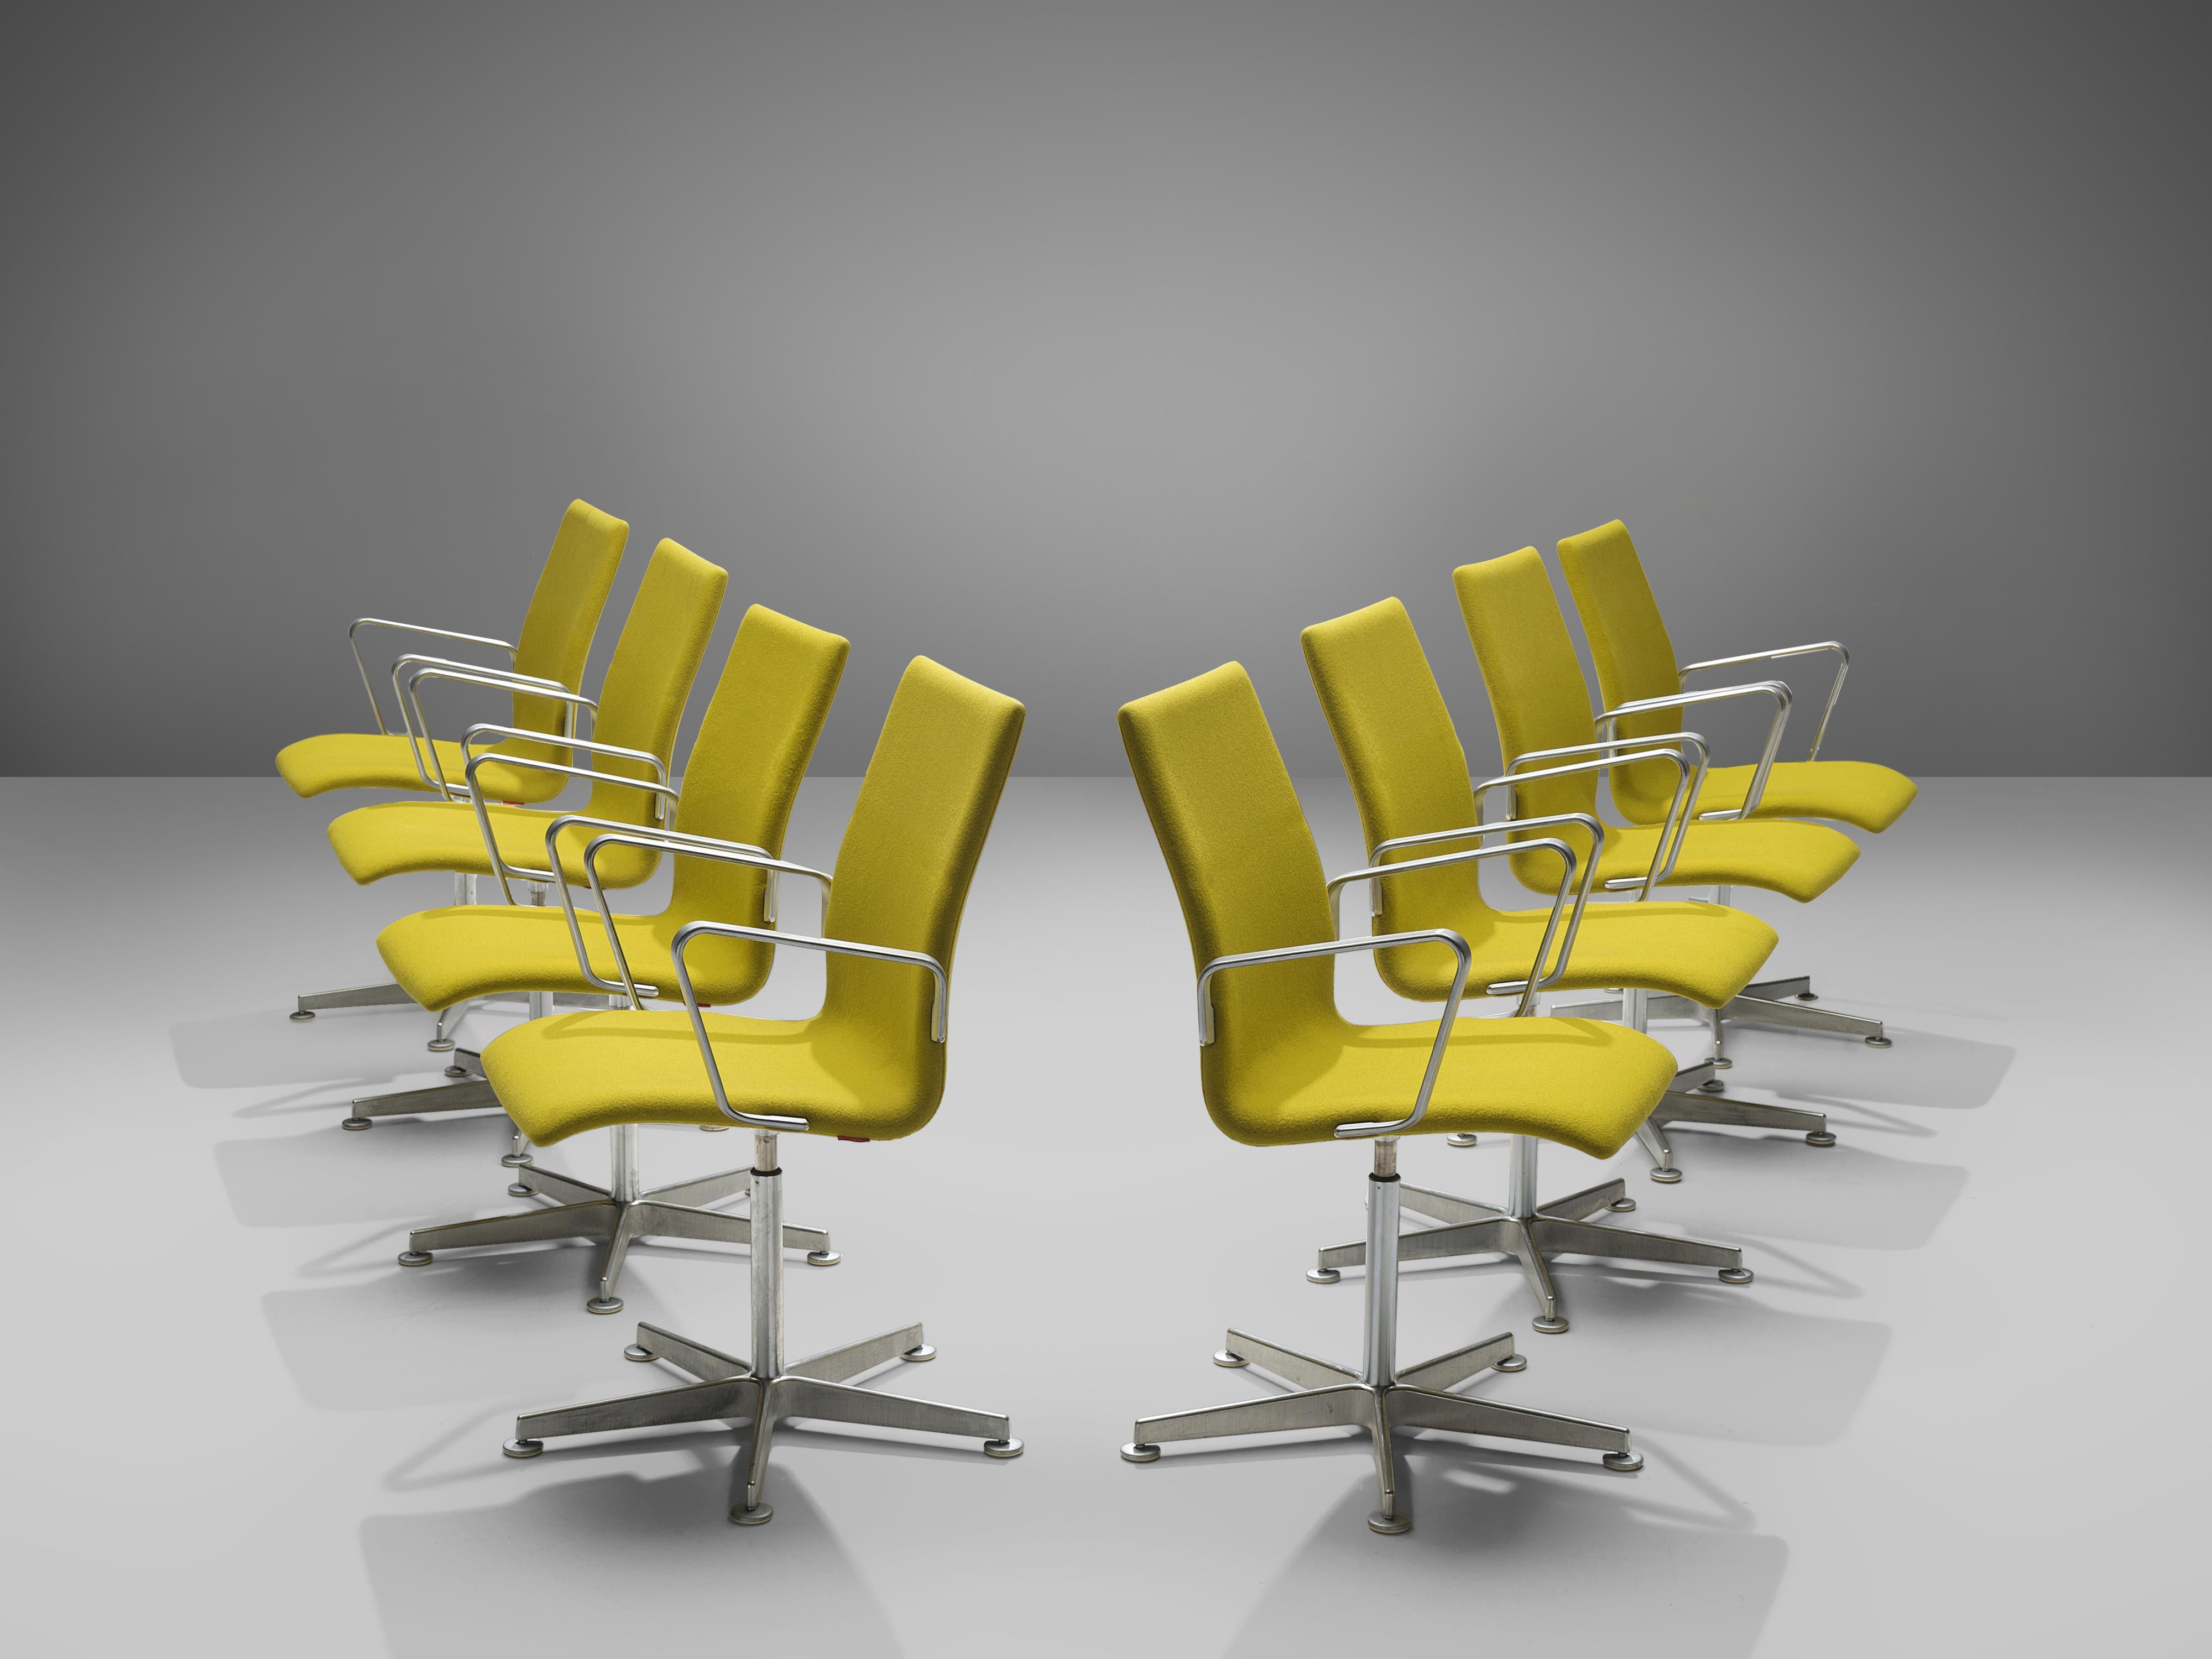 Arne Jacobsen for Fritz Hansen, set of eight 'Oxford' chairs, metal, yellow fabric, Denmark, design 1965, later production

These classic executive office chairs feature a medium high back (as opposed to the models with a low and a very high back),